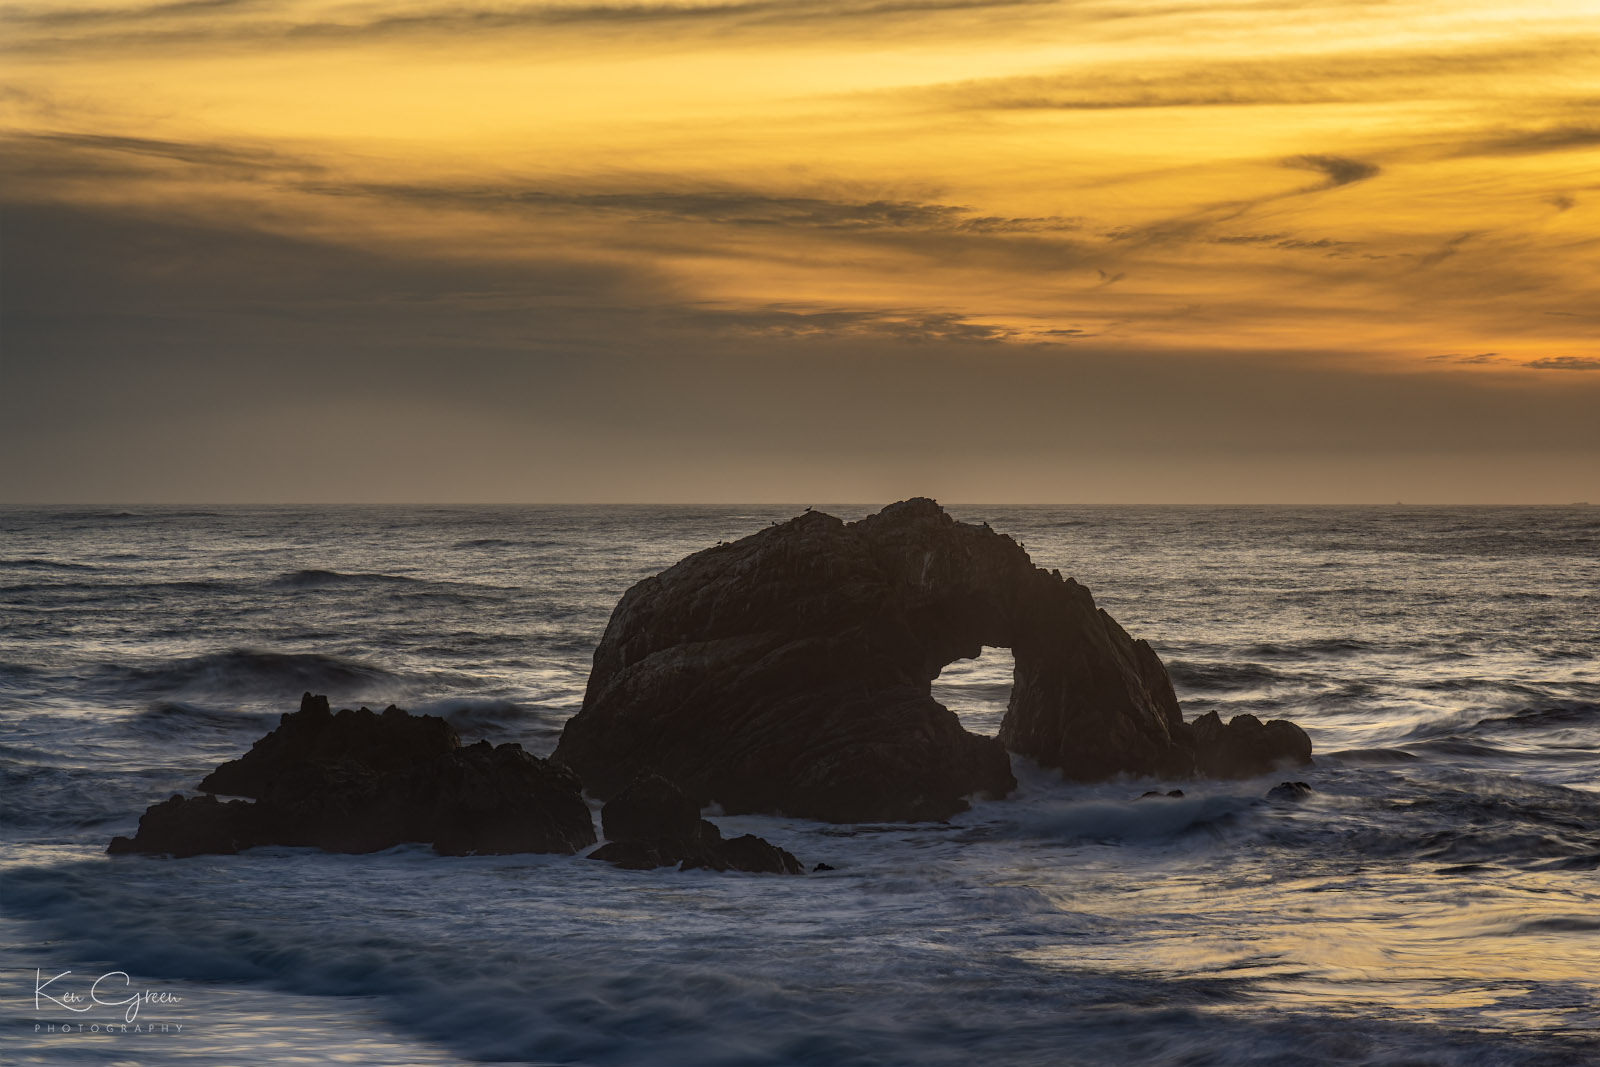 Sea stack near Land's End on San Francisco shore at sunset 